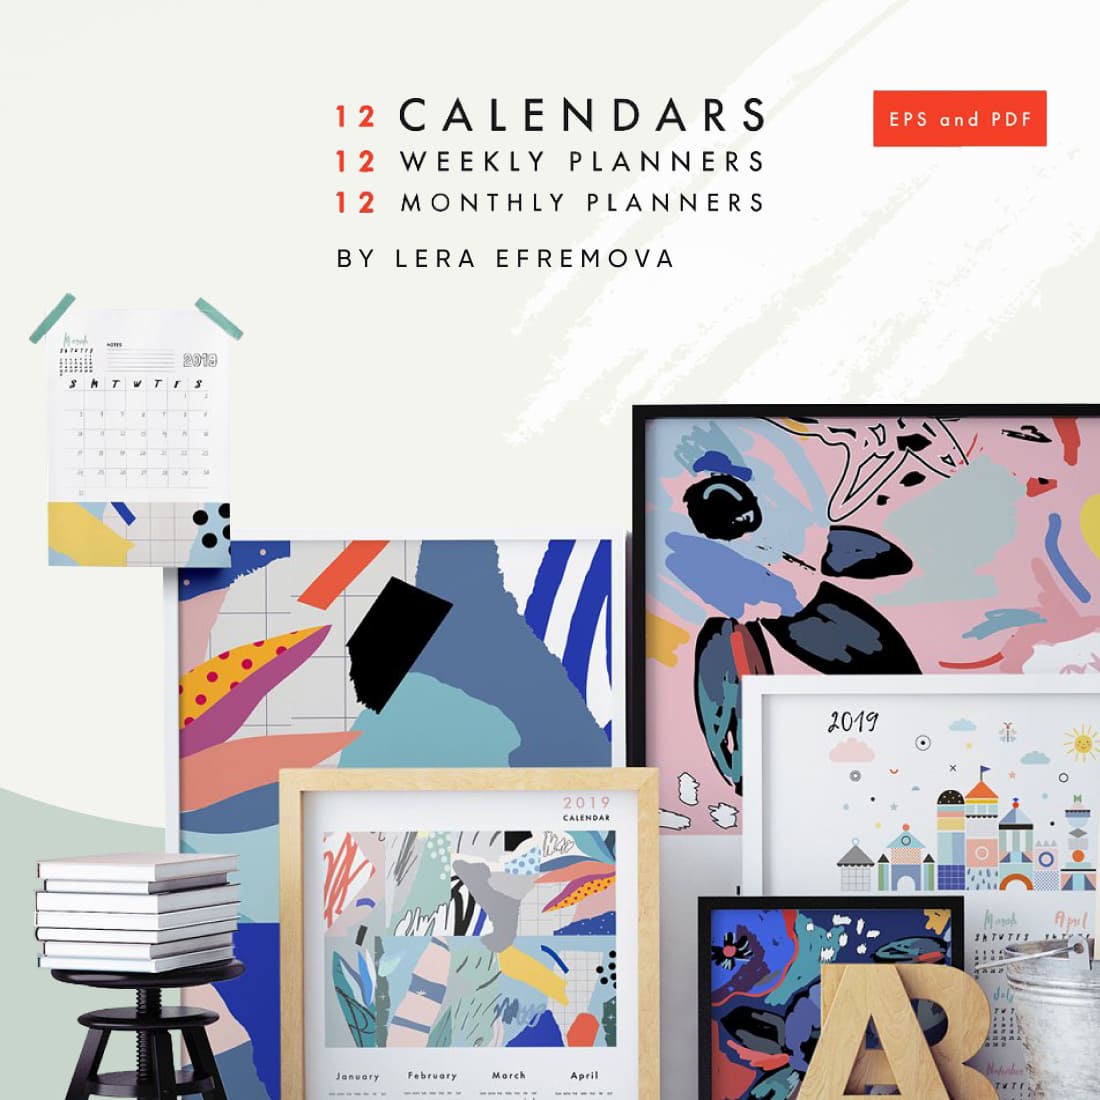 2019 calendars planners cover